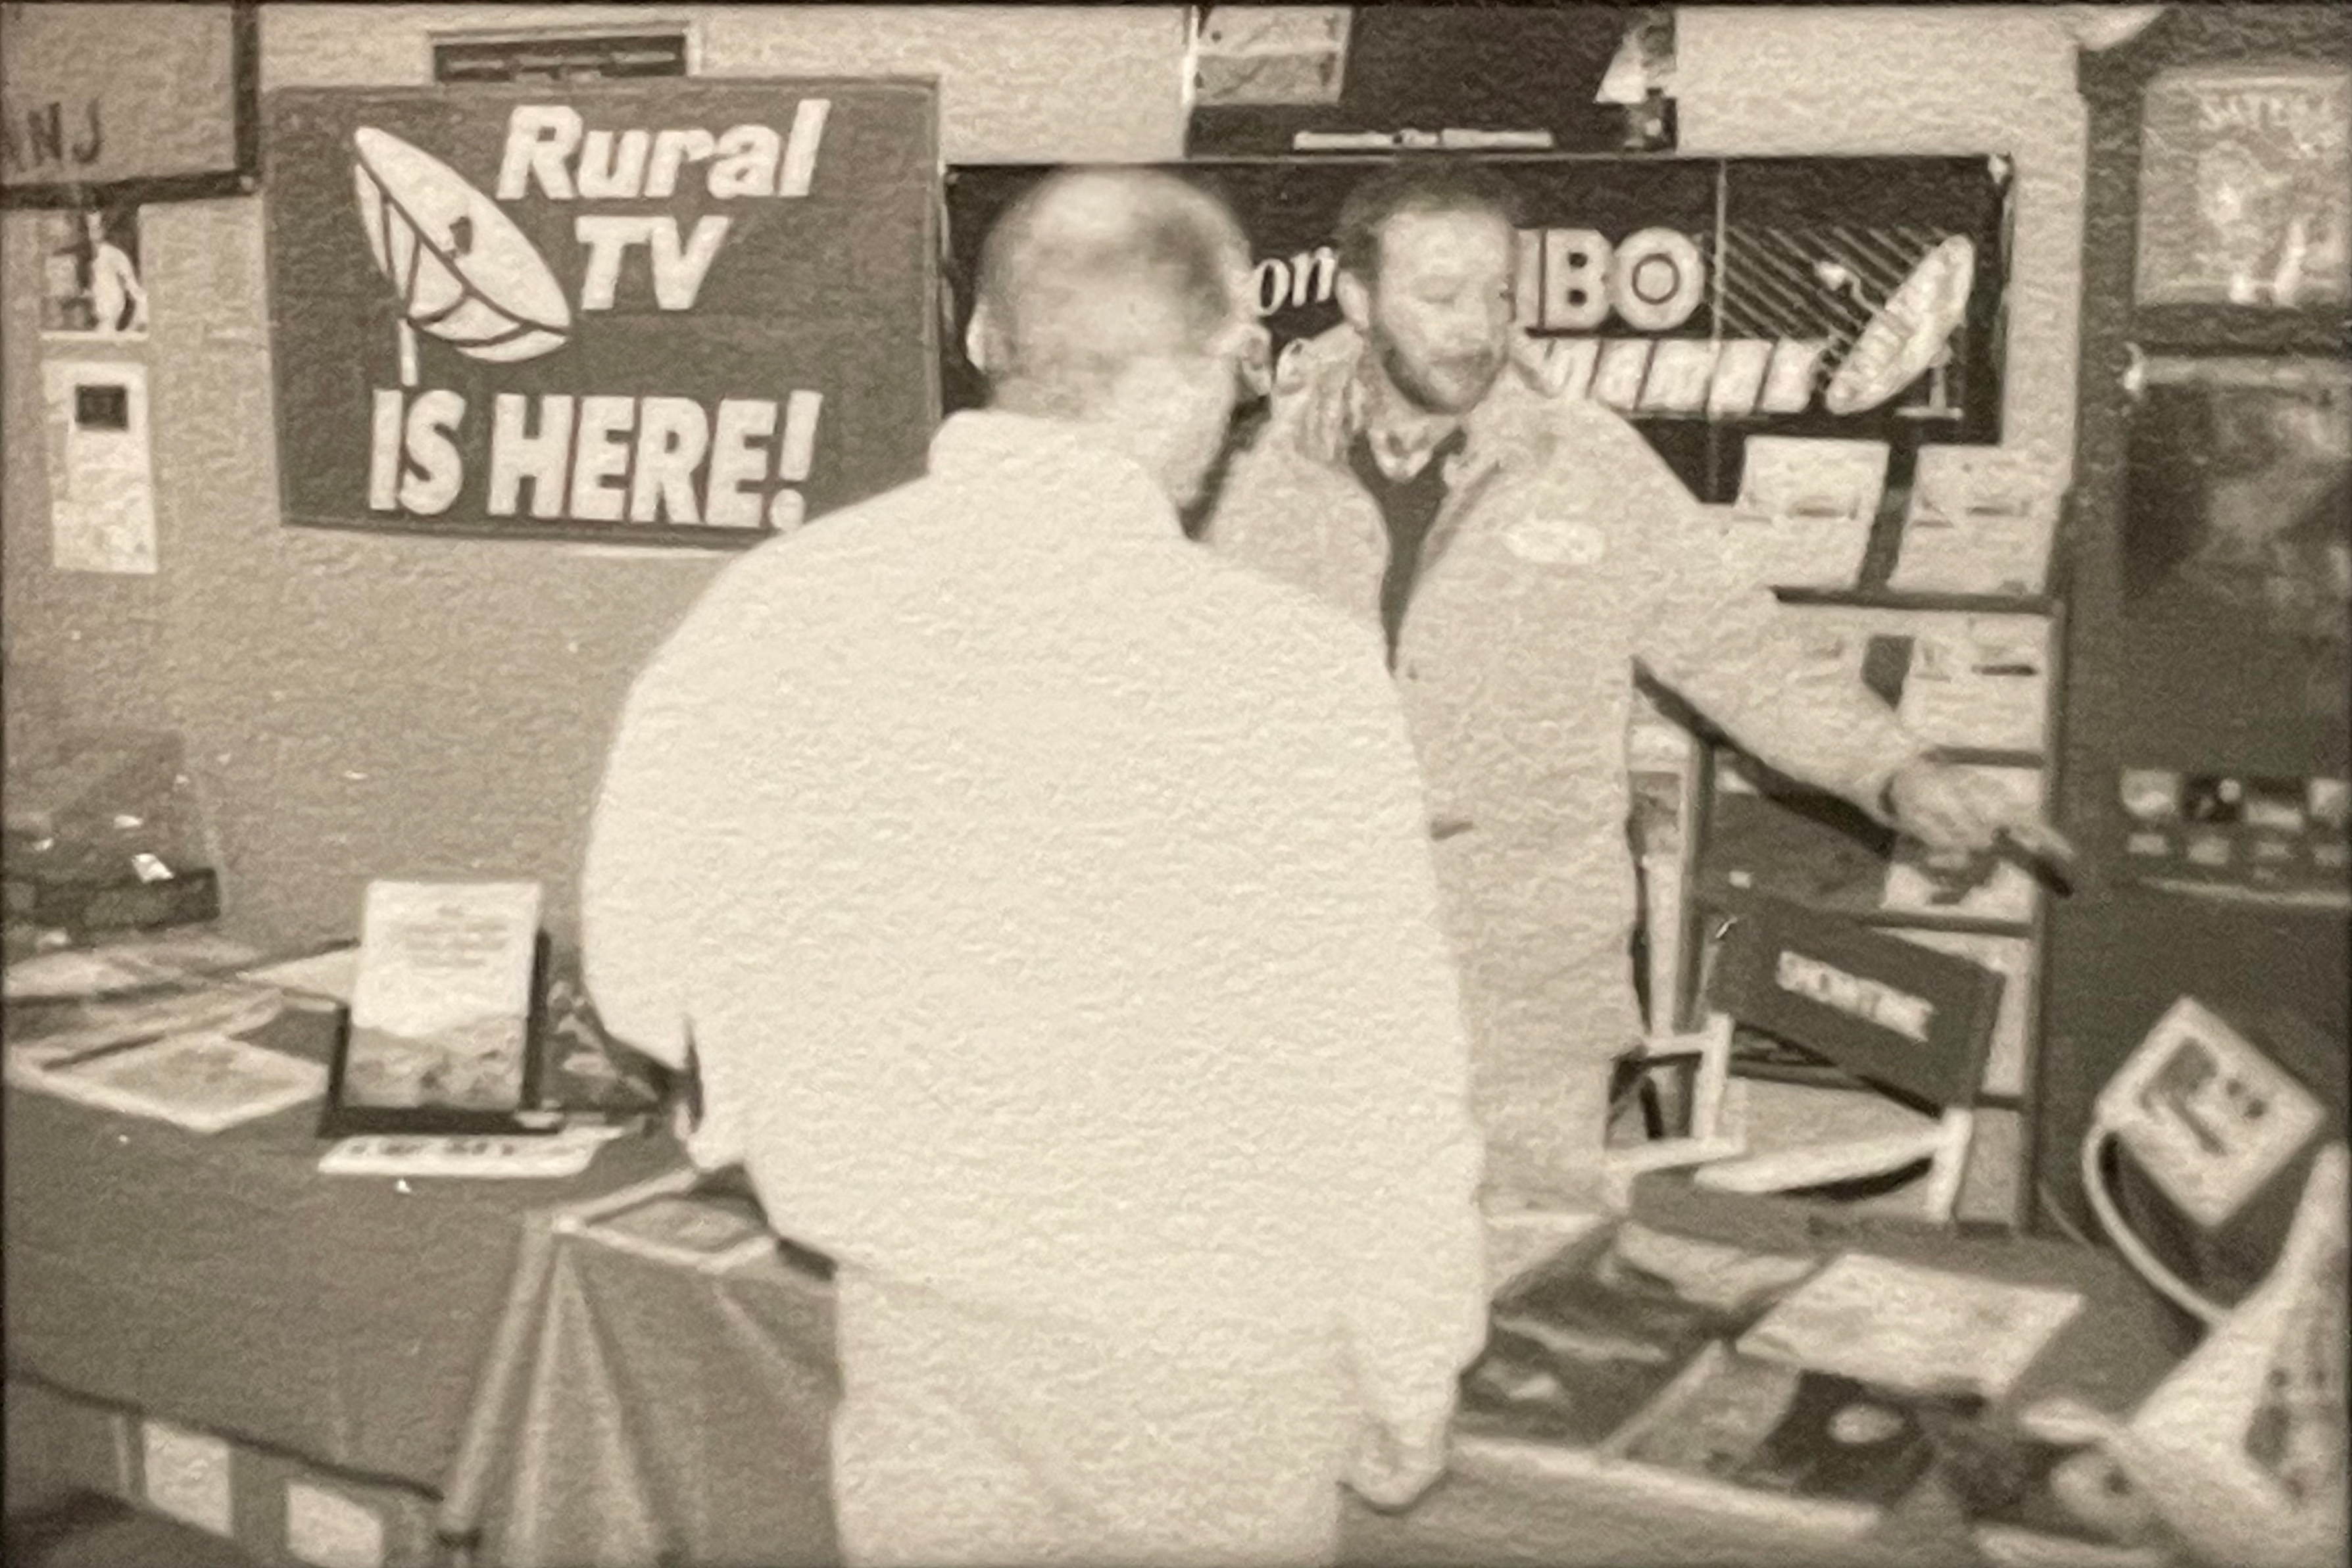 Pictured: Two men speaking at a public event discussing the benefits of satellite TV for rural communities. A prominent sign in the background reads: “Rural TV IS HERE!”